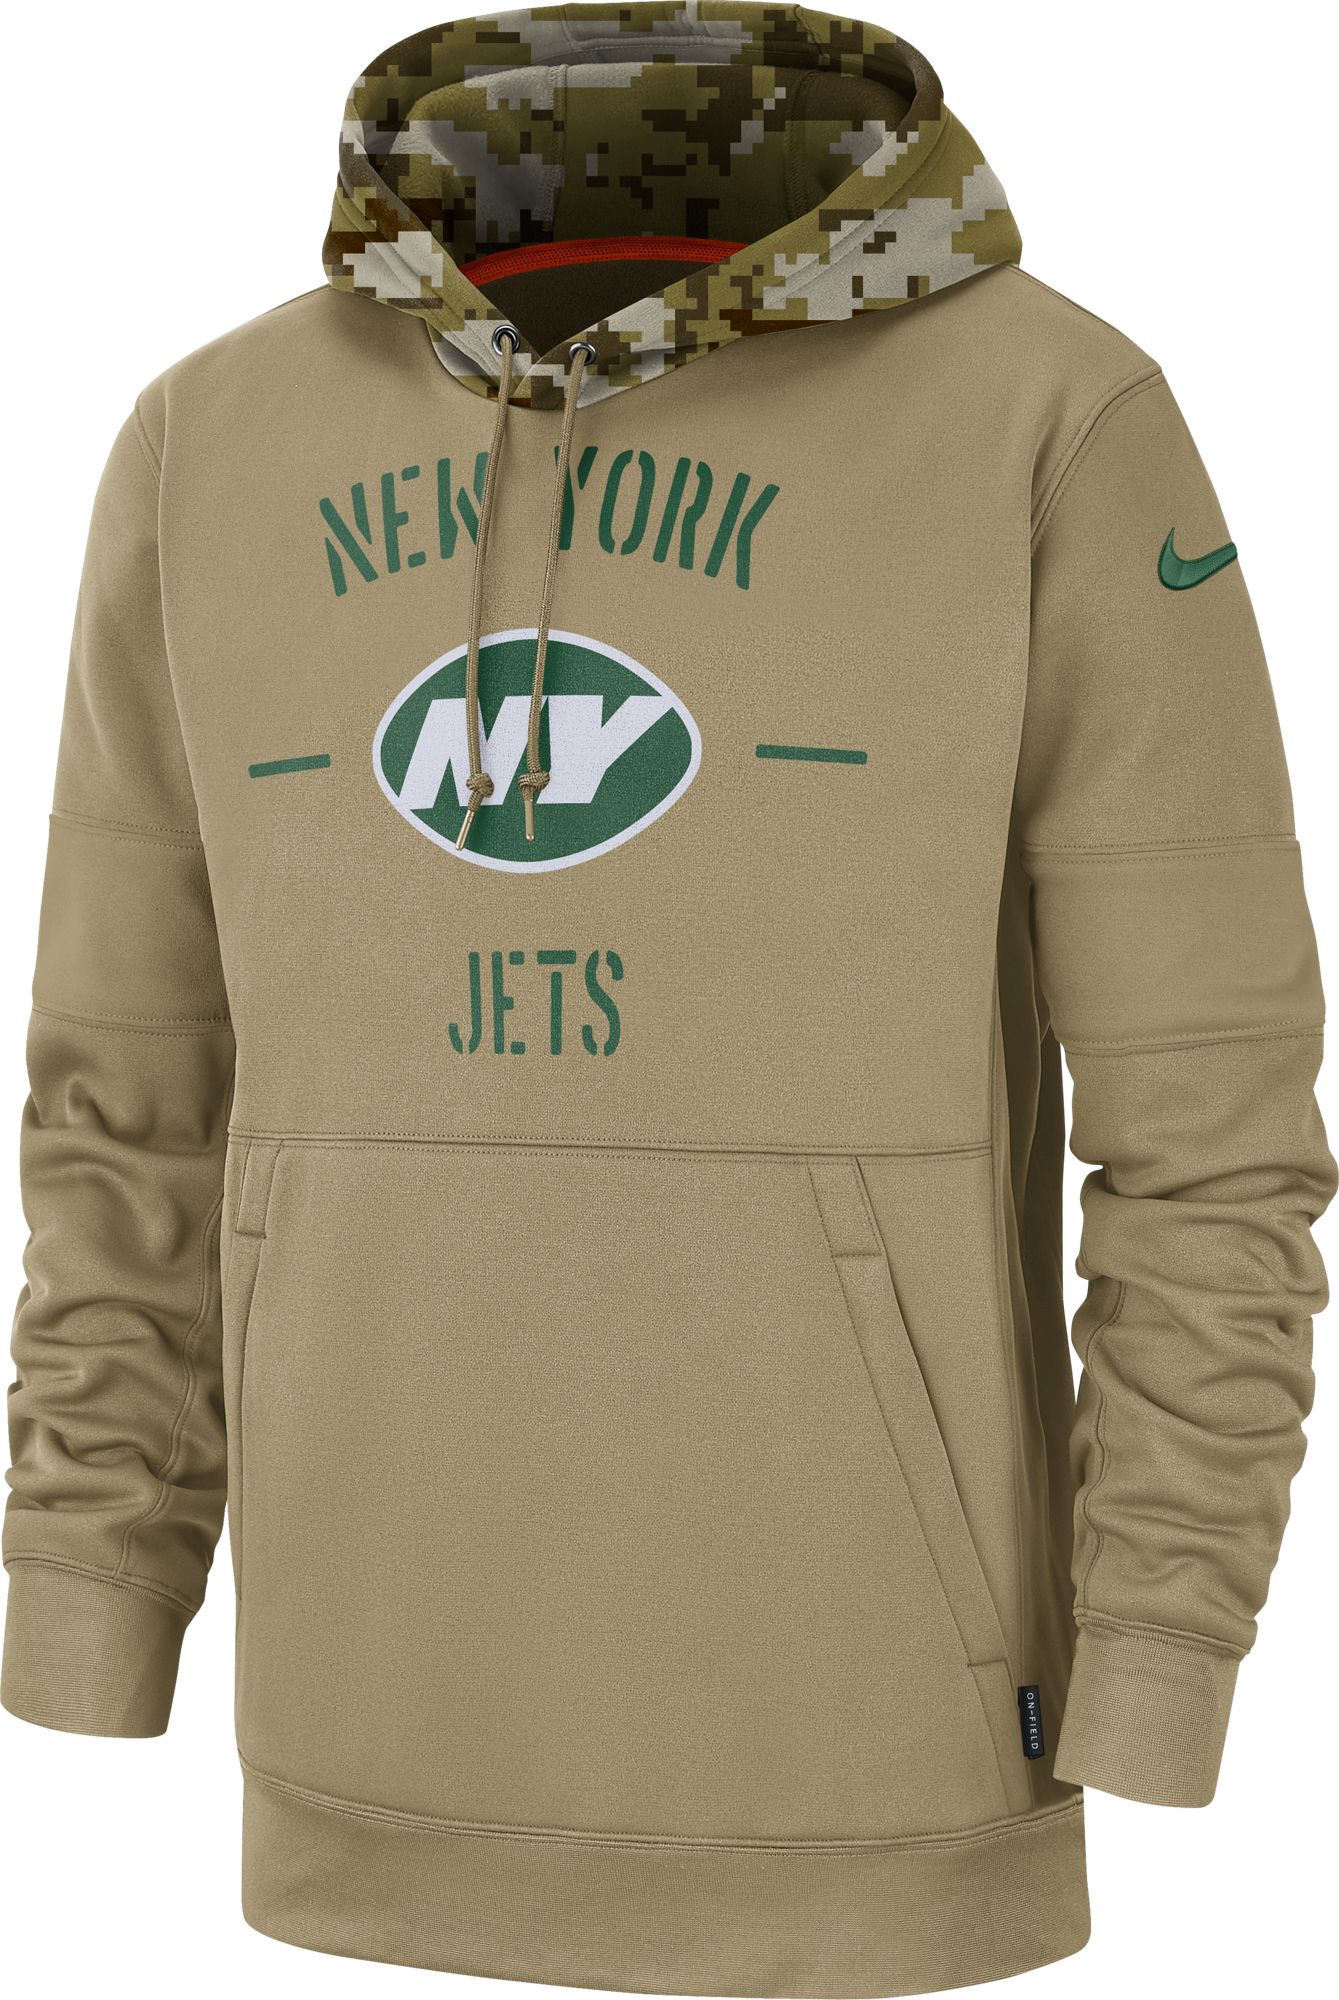 ny jets salute to service hoodie